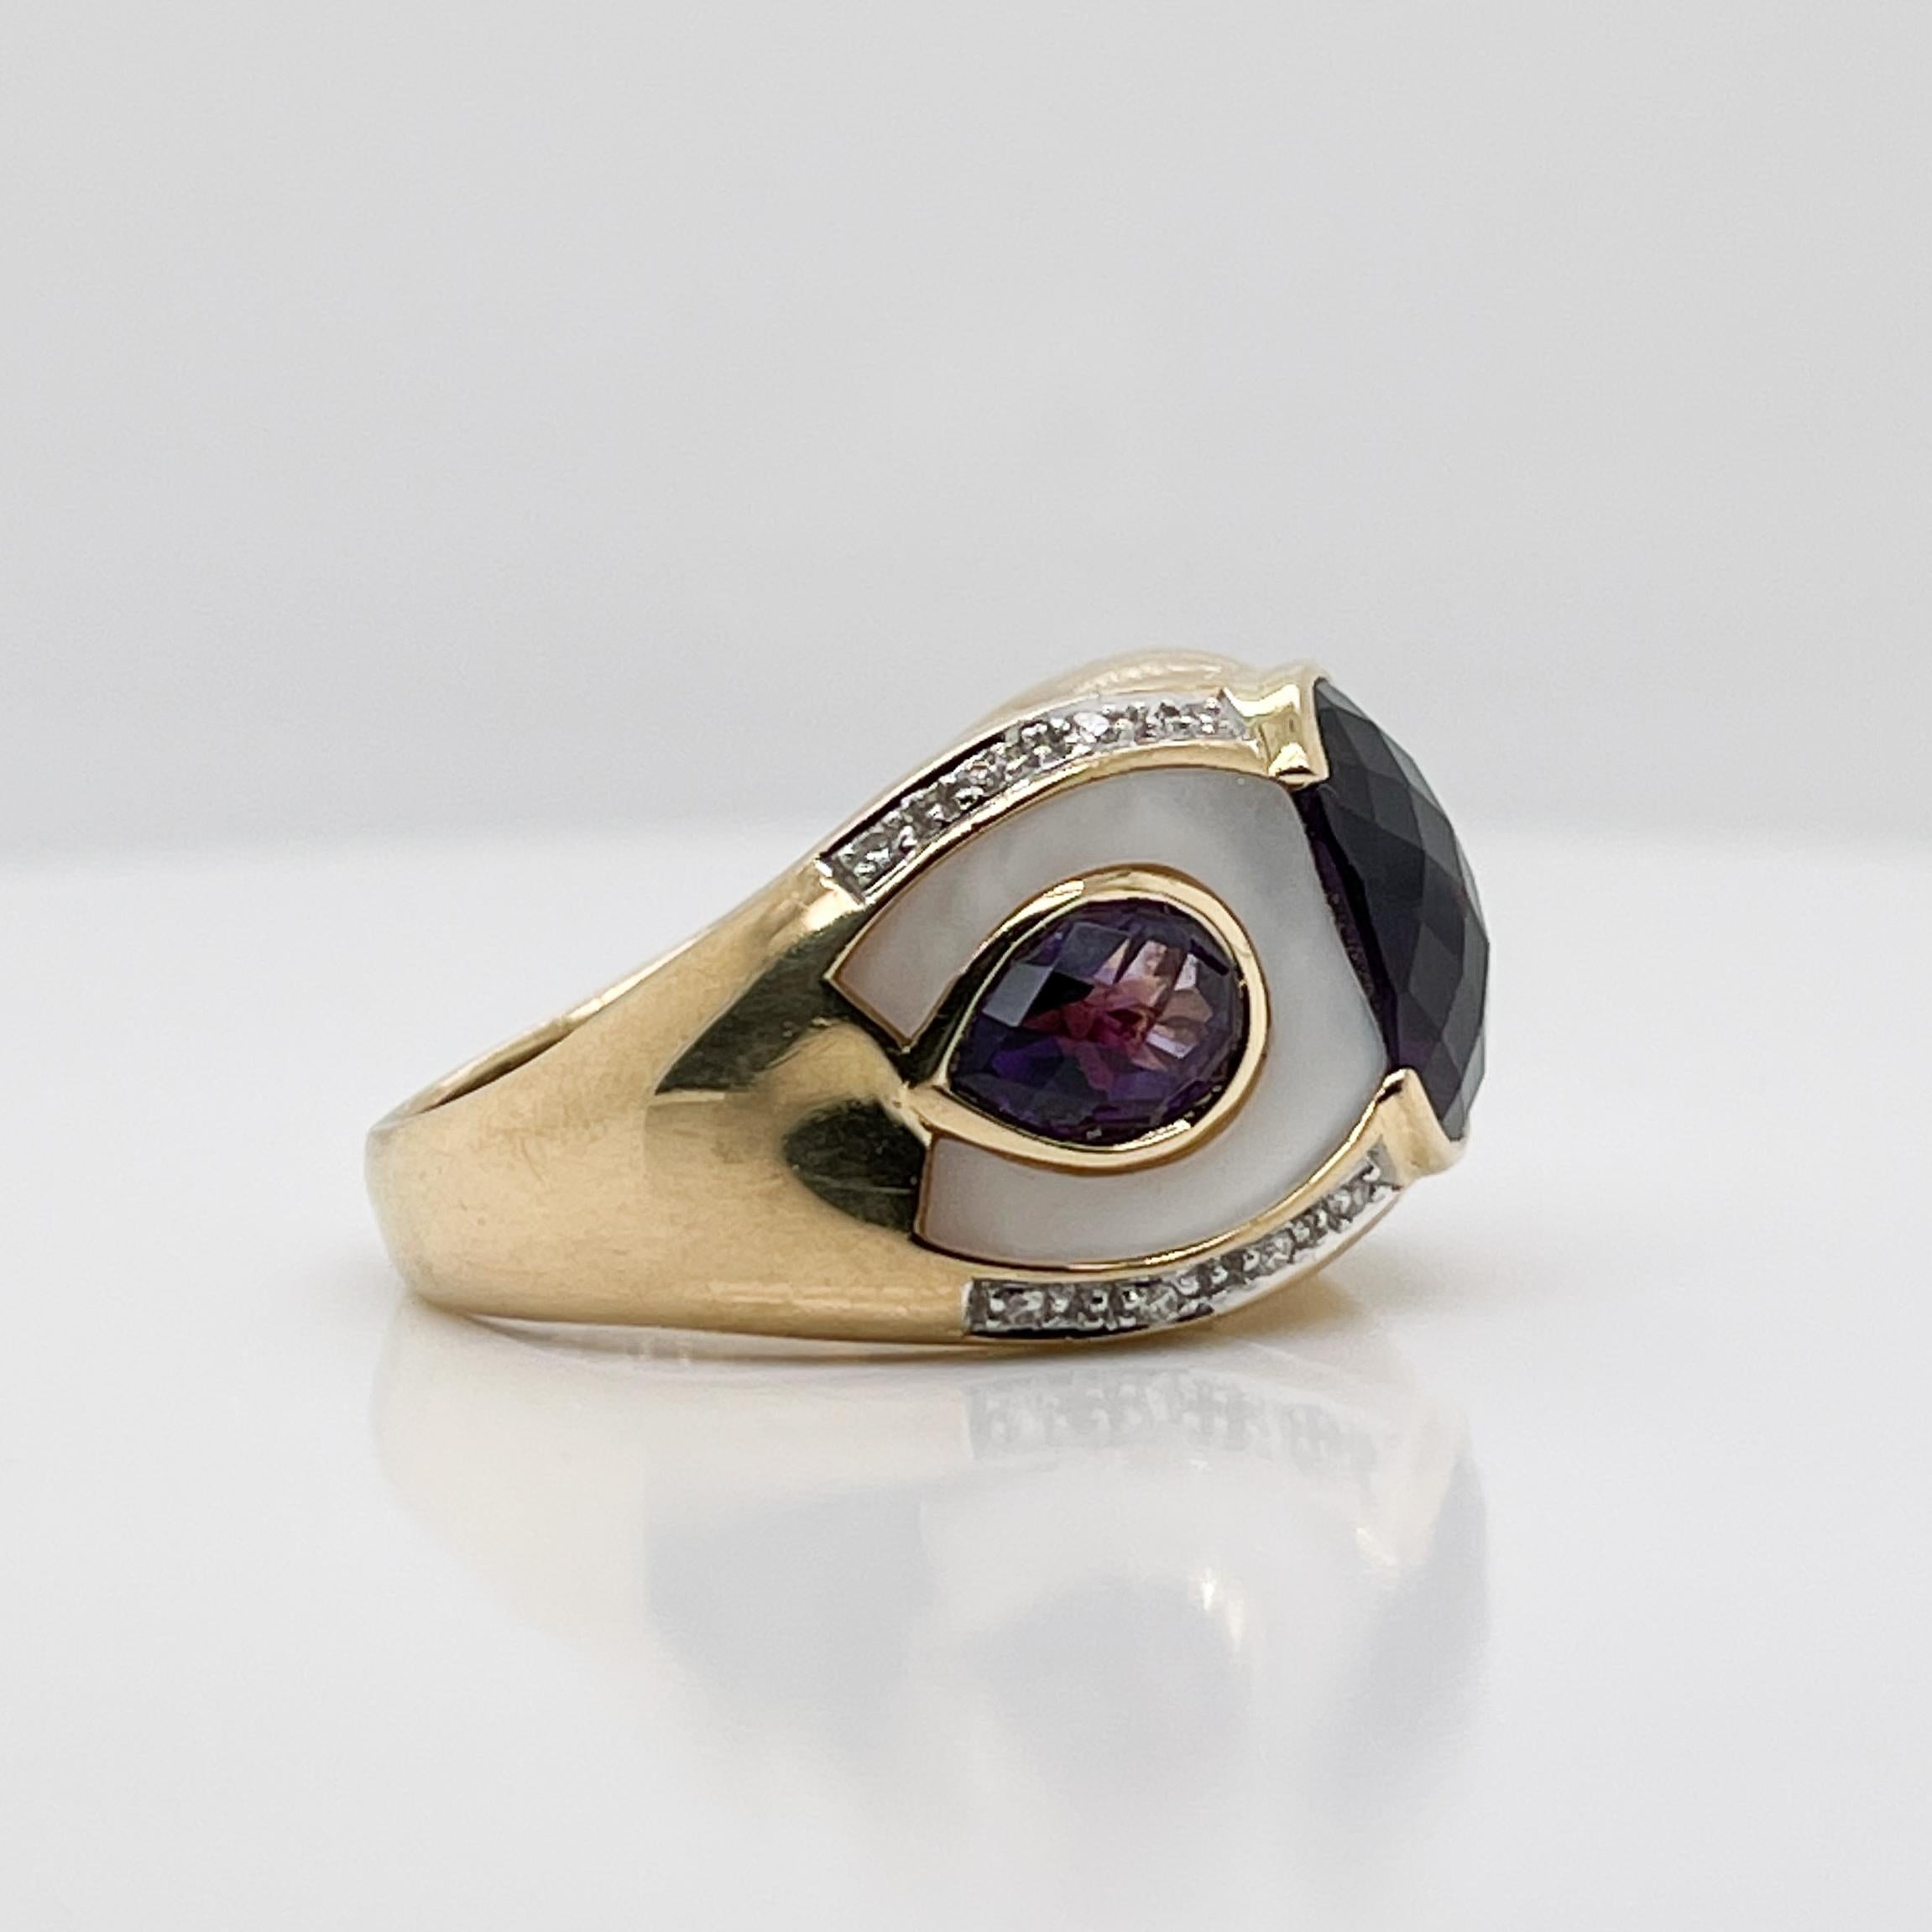 Owl/Parrot Bird Cocktail Ring in 18k Gold, Mother of Pearl, Diamond & Amethyst For Sale 3